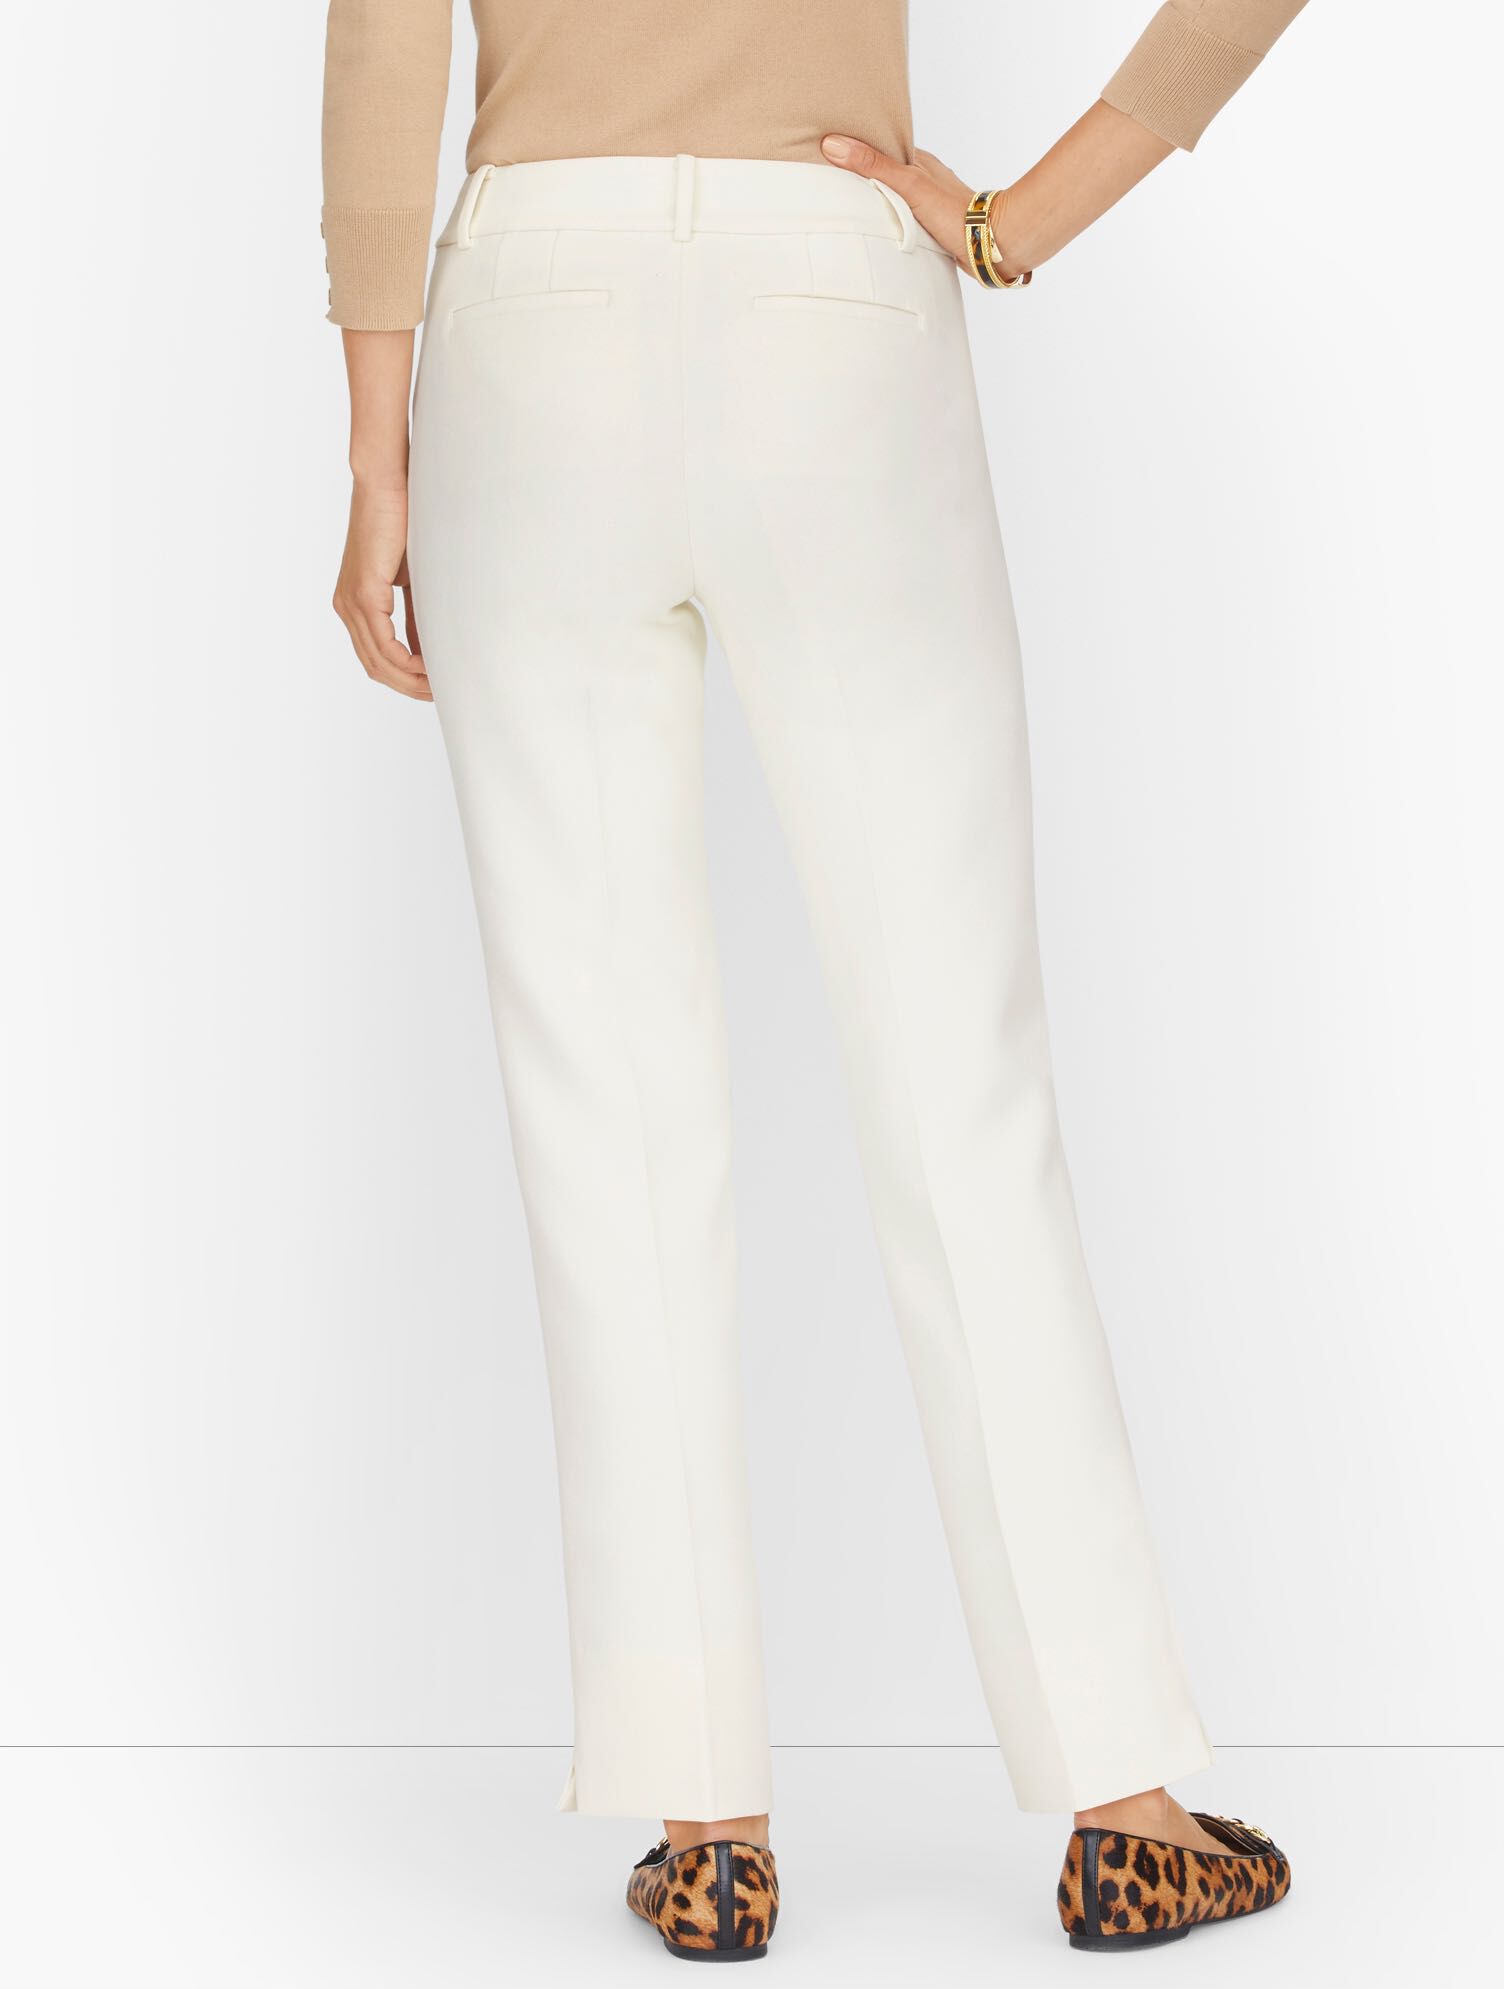 Talbots Hampshire Ankle Pants in 2023